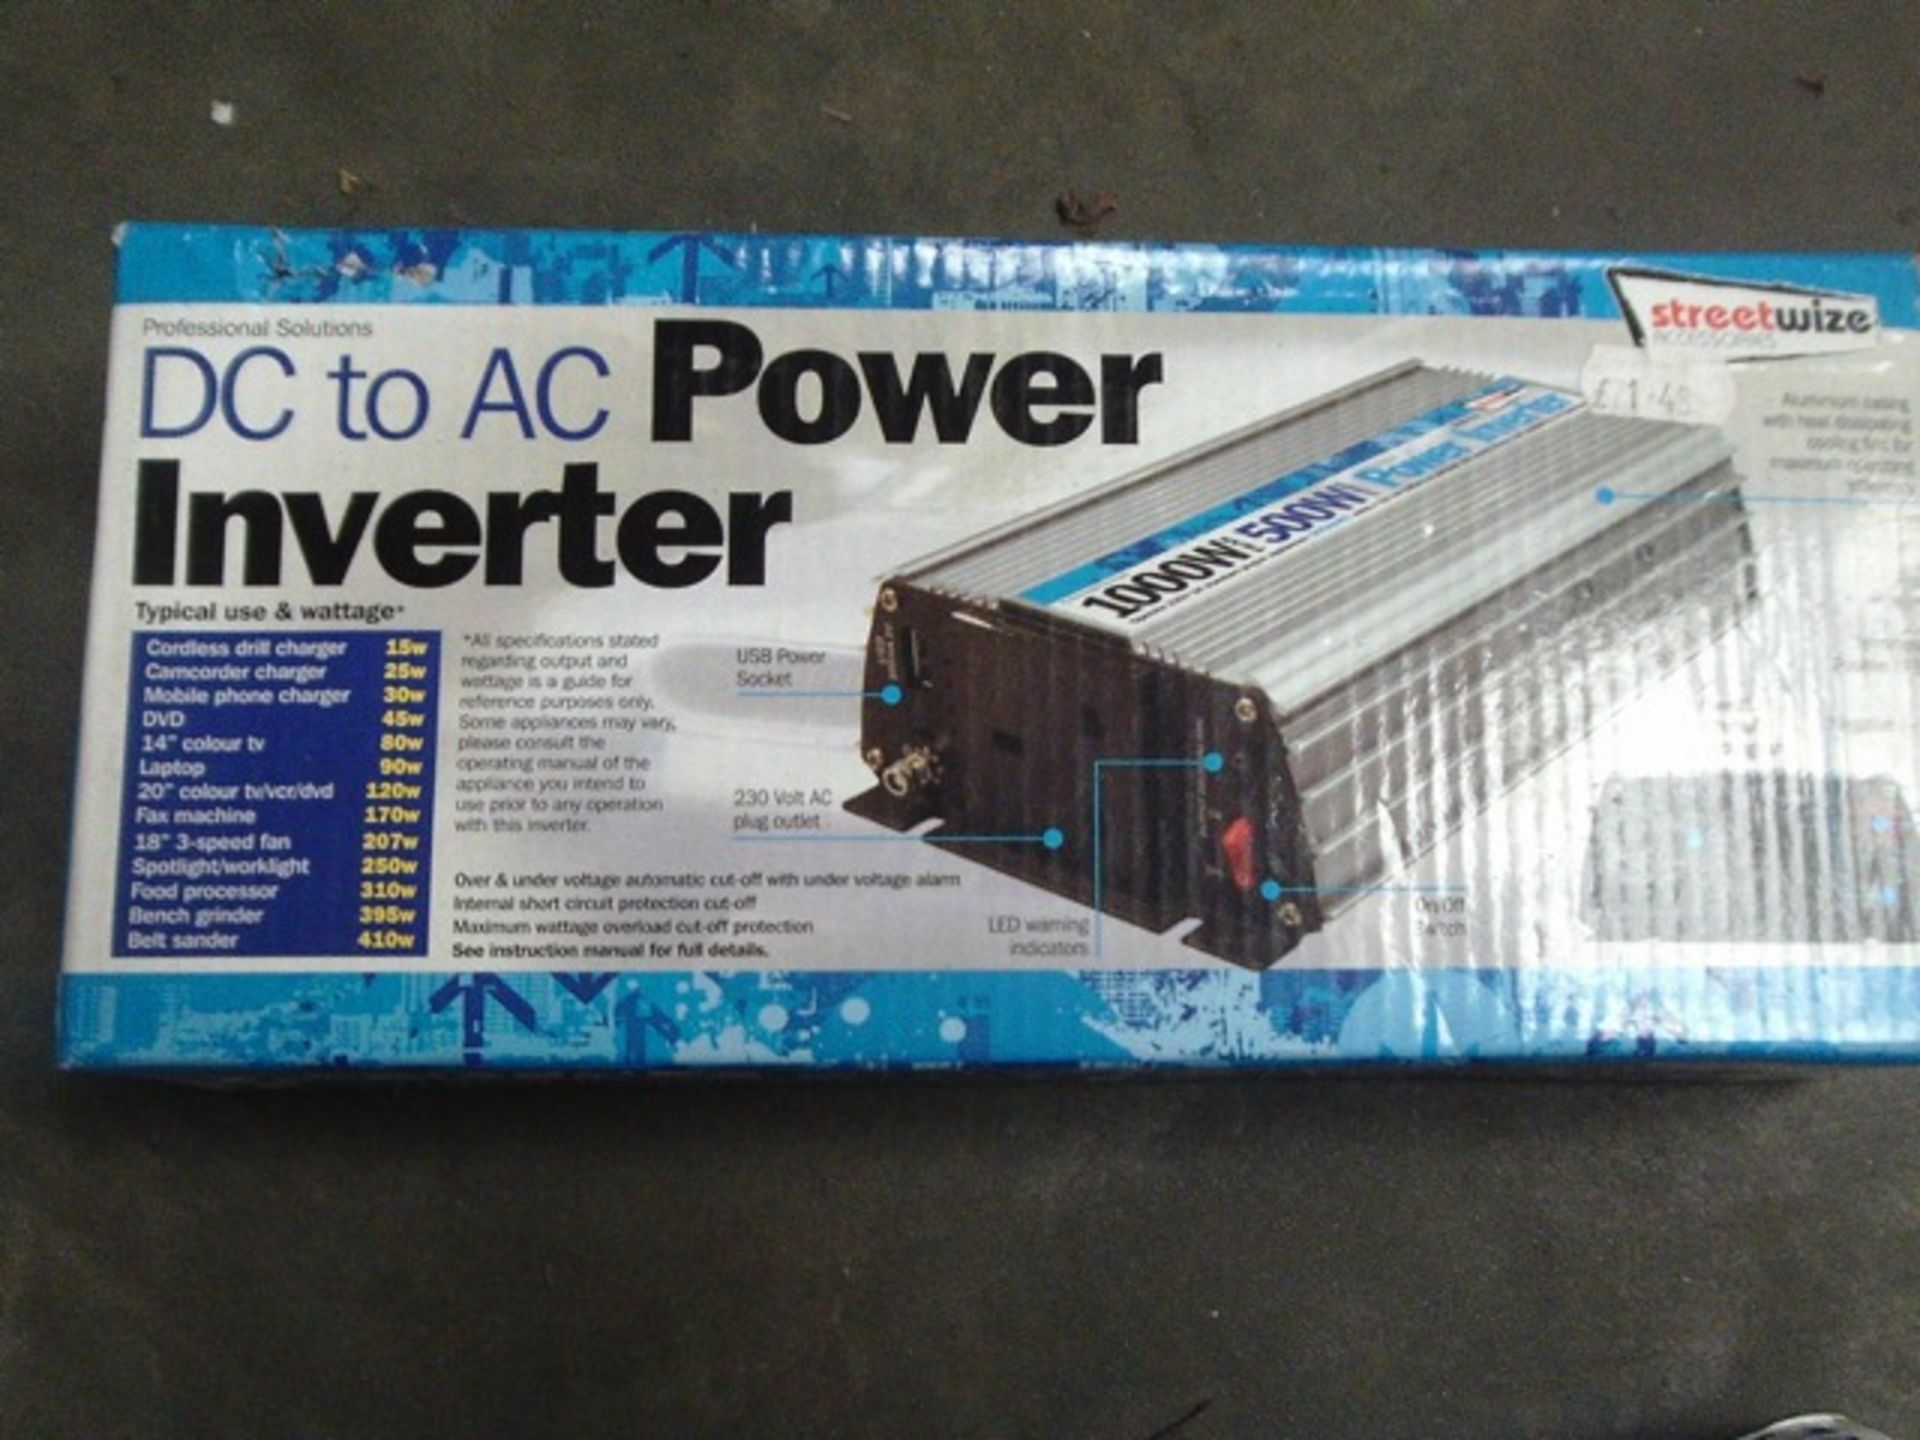 Streetwise DC AC Power Inverter -1000W to 500W inverter - boxed - rrp £69.99